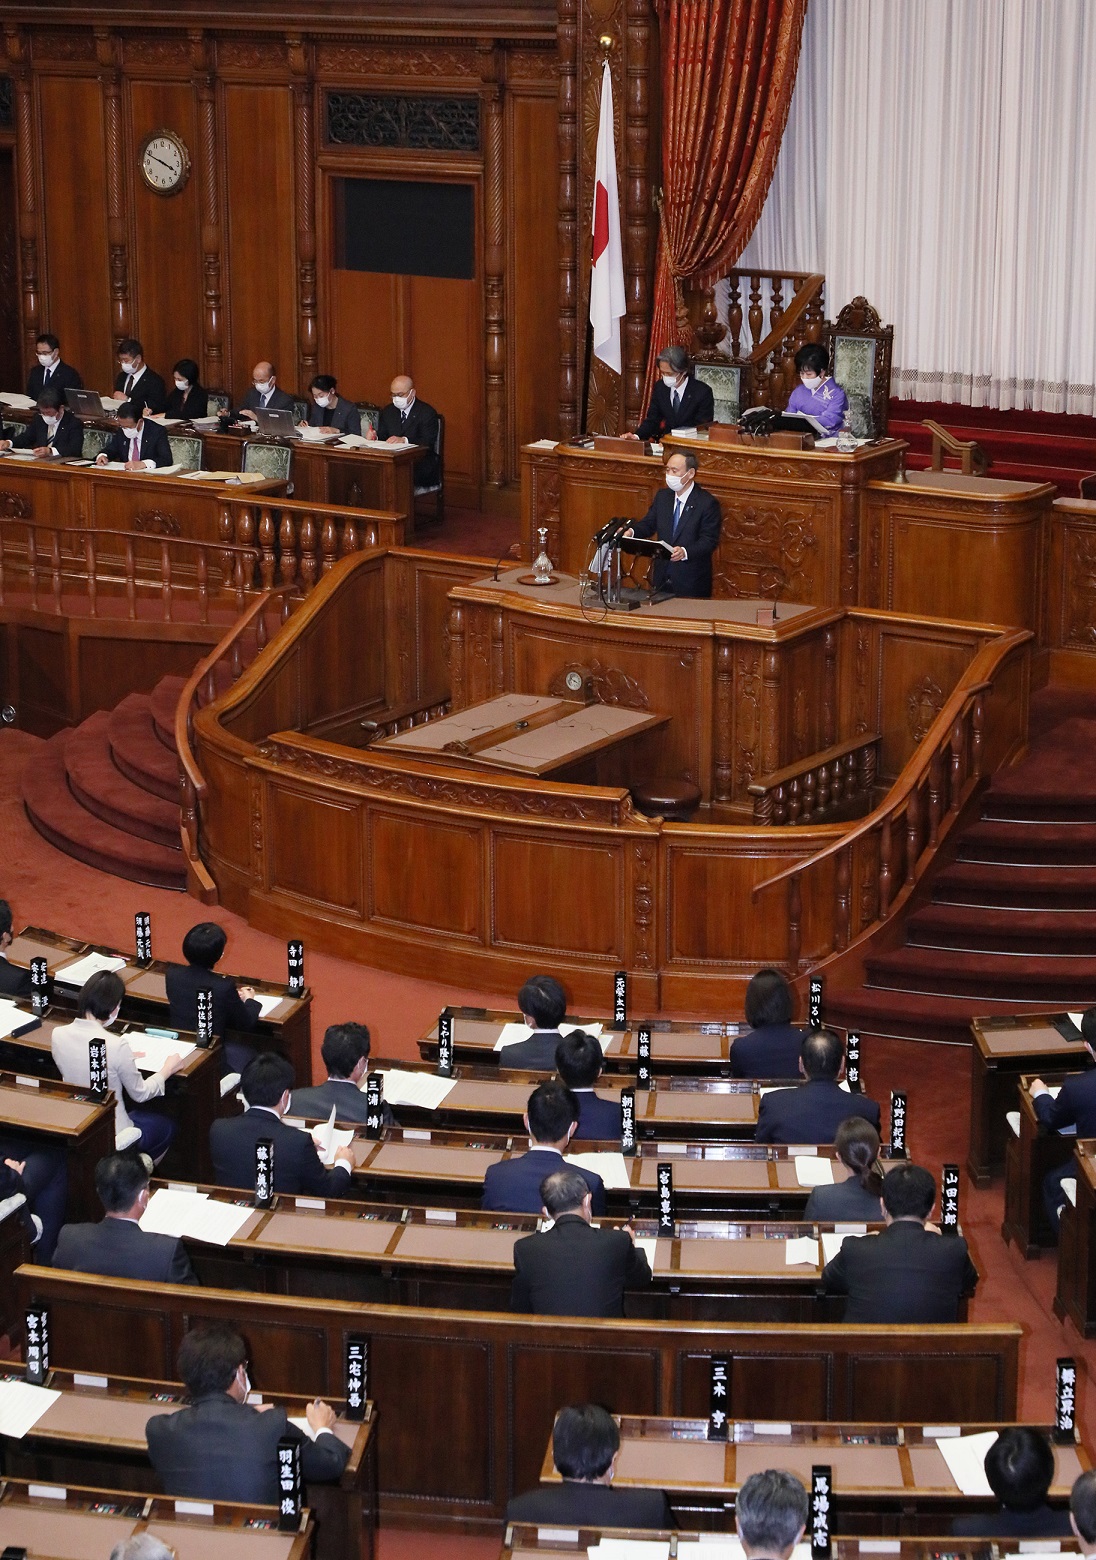 Photograph of the Prime Minister delivering a policy speech during the plenary session of the House of Councillors (10)